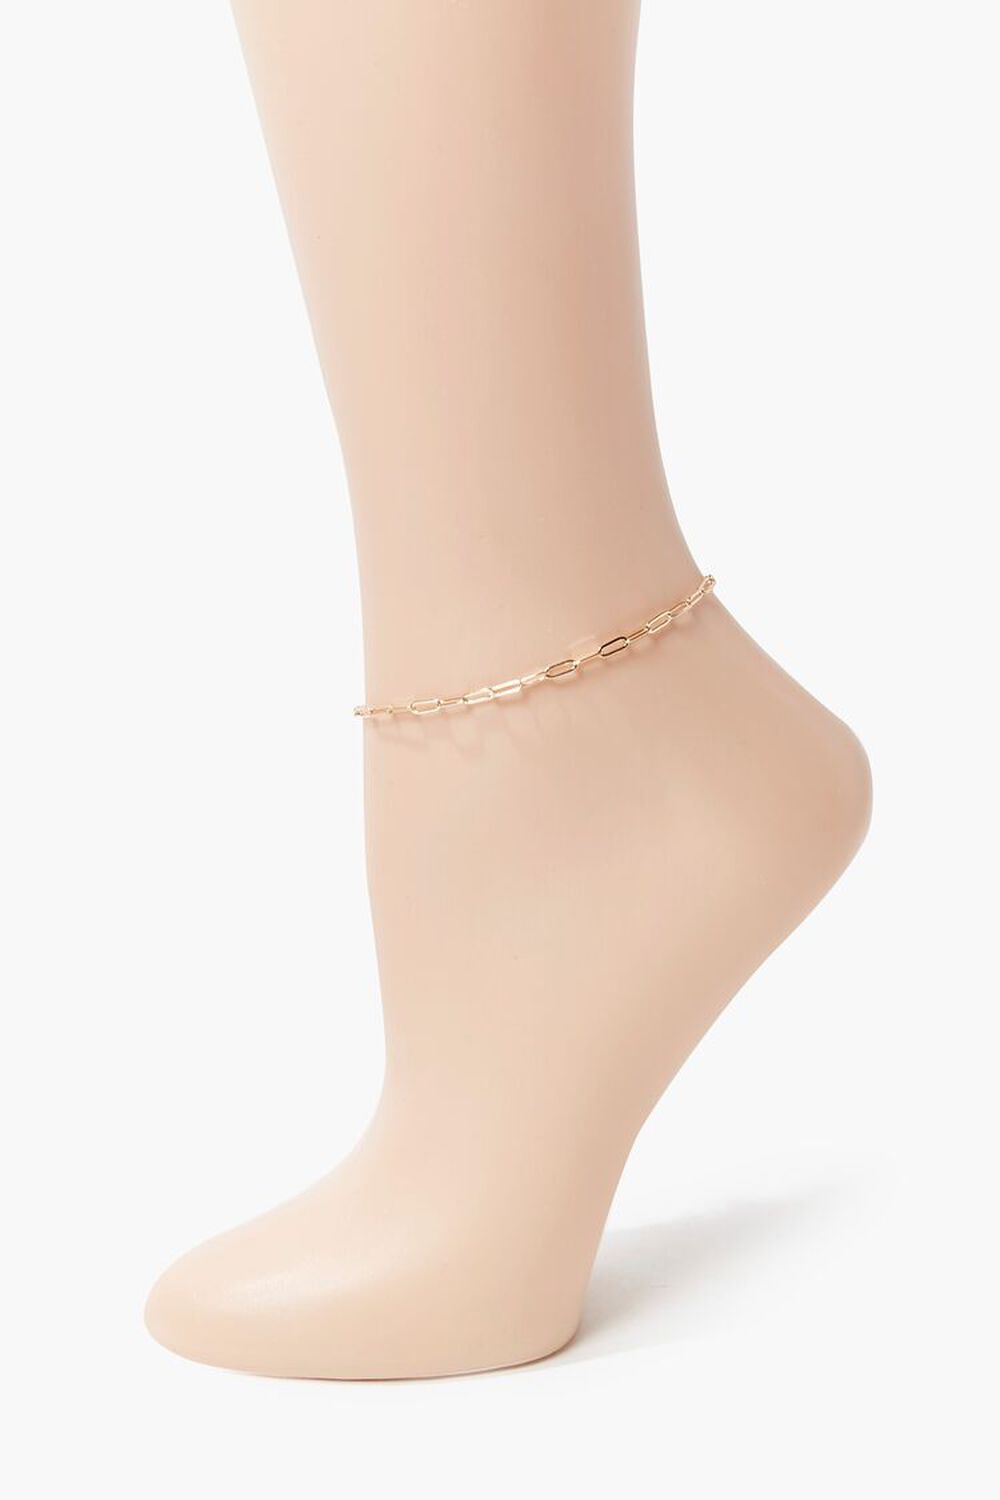 GOLD Anchor Chain Anklet, image 1